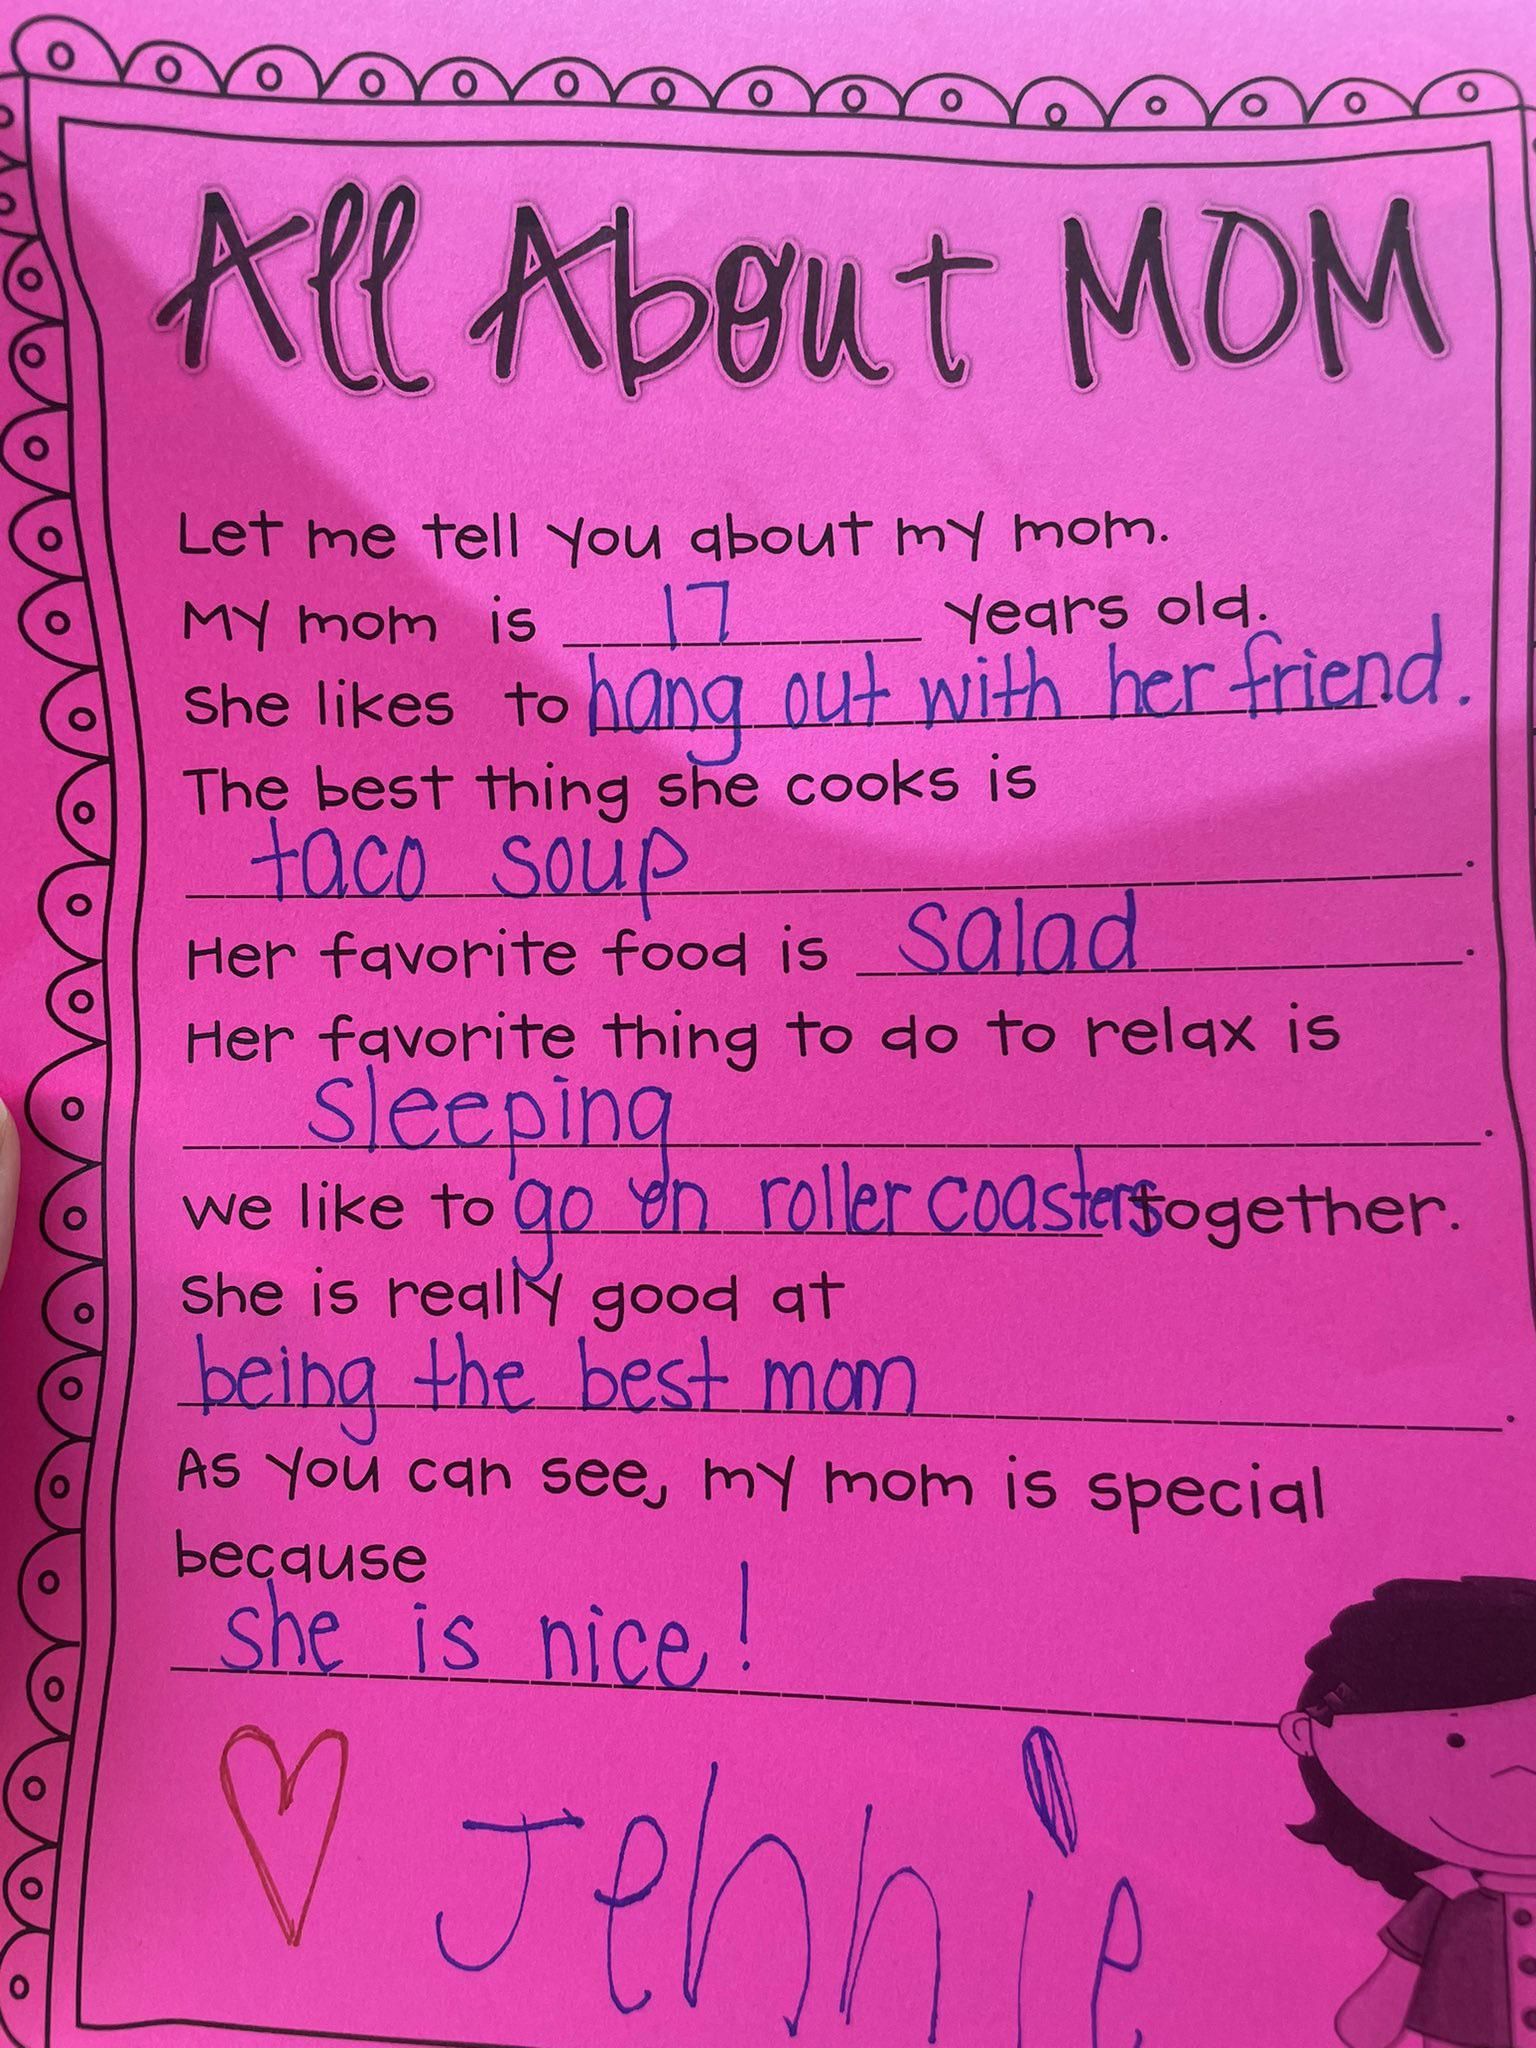 My 6-year old made this for my 31-year old wife…